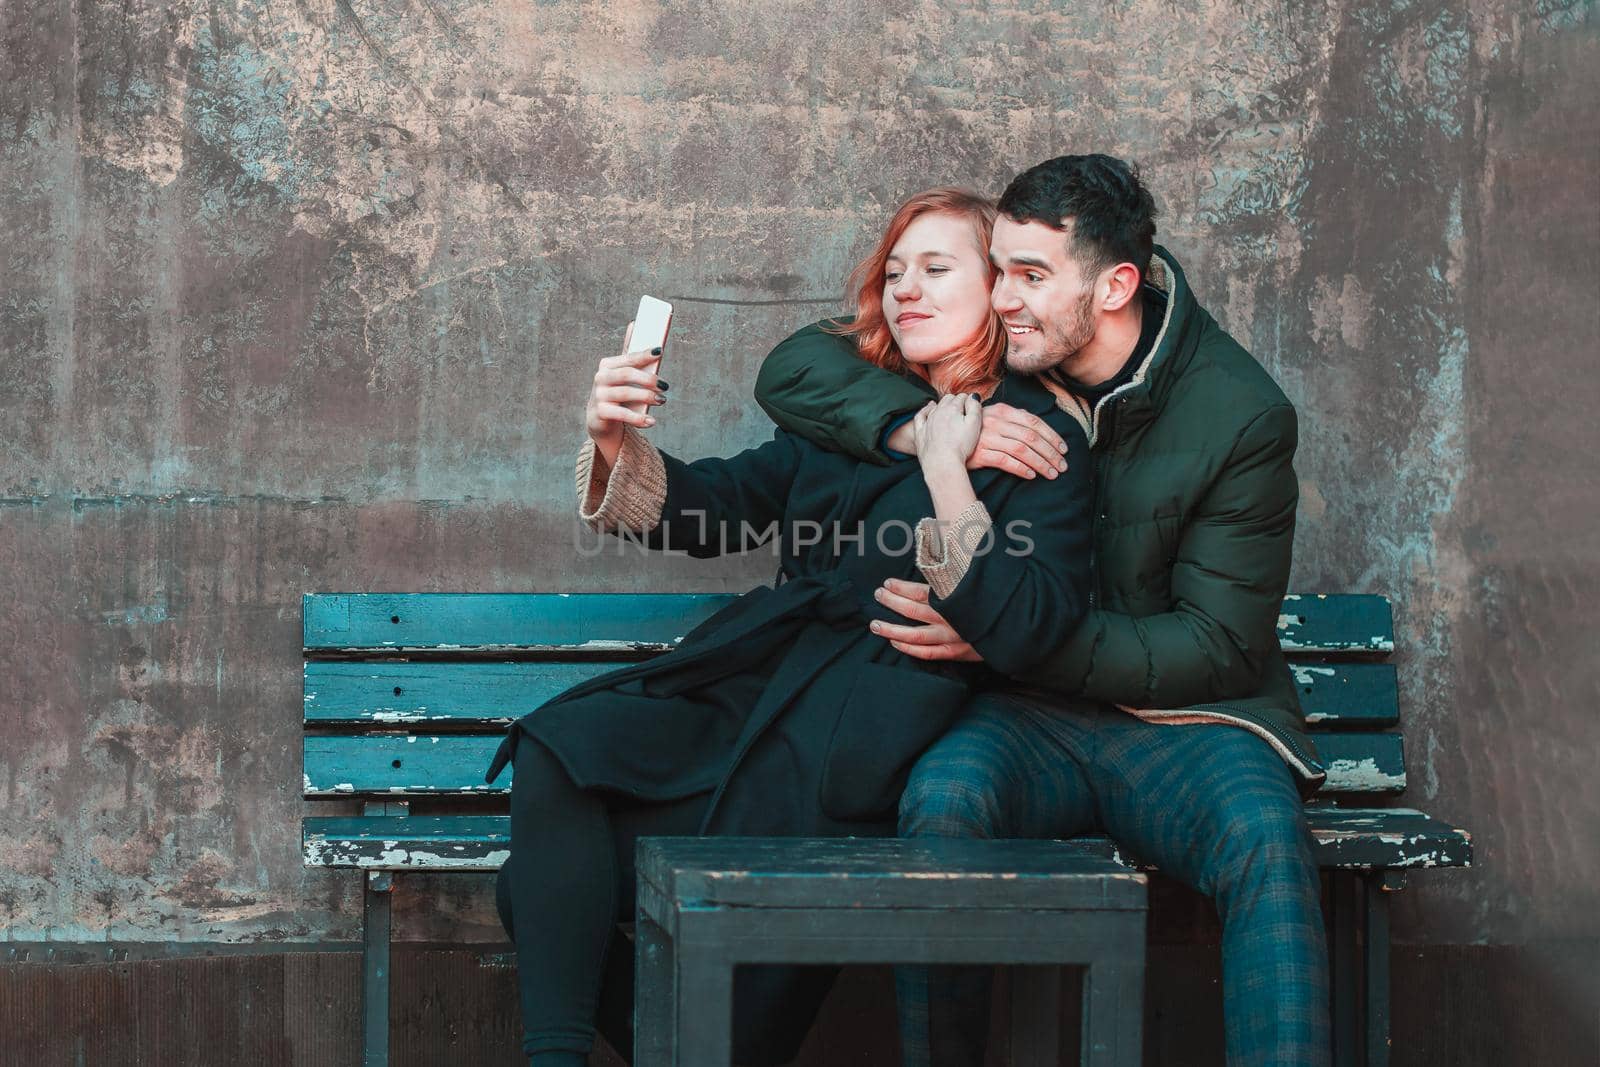 Cheerful Emotional Young Couple Sitting on the Bench and Making Selfie. Two Happy People Love Story on the Street